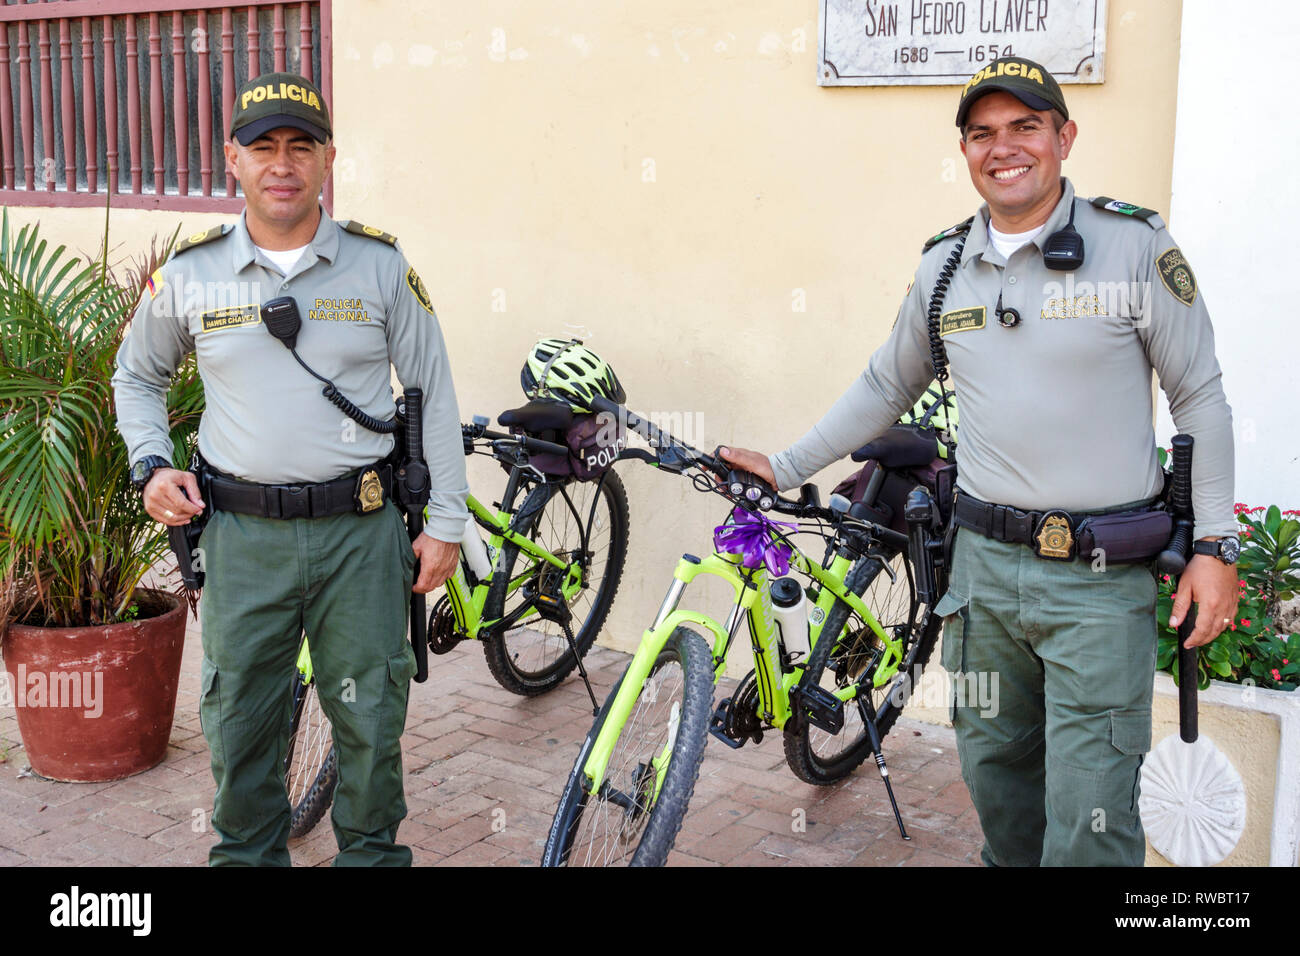 Cartagena Colombia,Plaza San Pedro Claver,Hispanic resident residents,National Police,policia,officer,uniform,law enforcement,man men male,bicycle bic Stock Photo